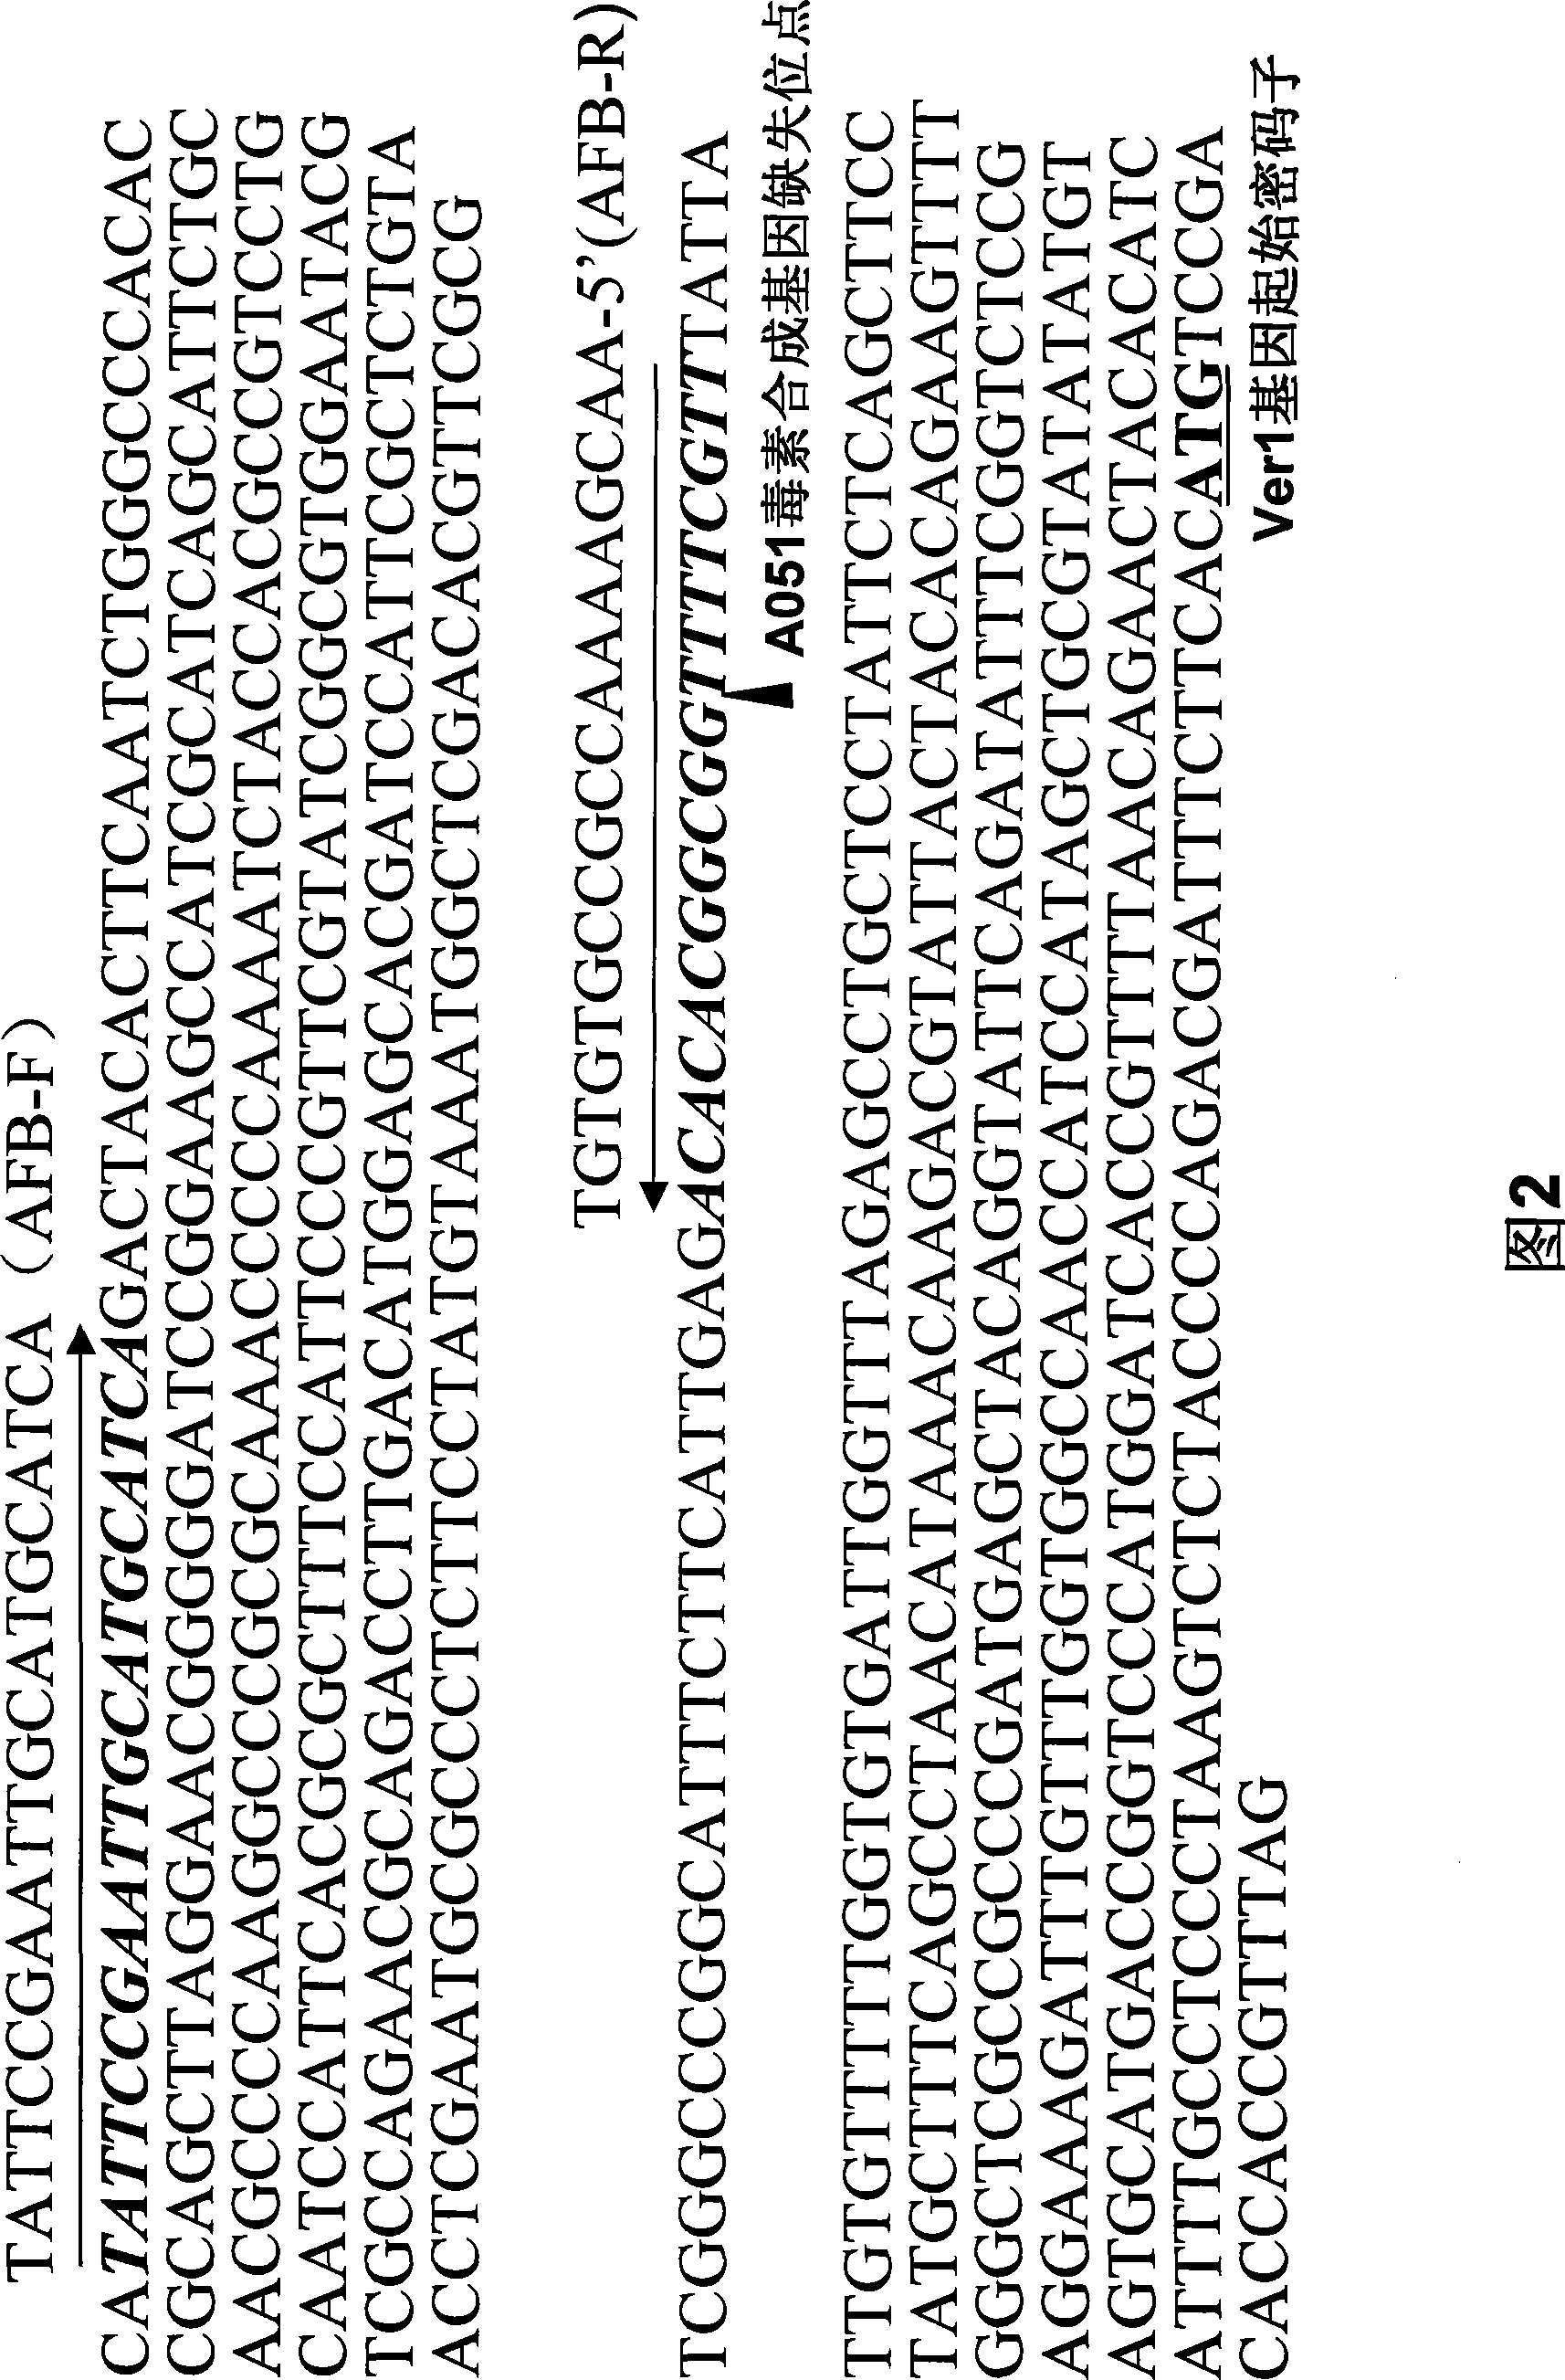 Aspergillus flavus strain without producing aspergillus flavus toxin and uses thereof